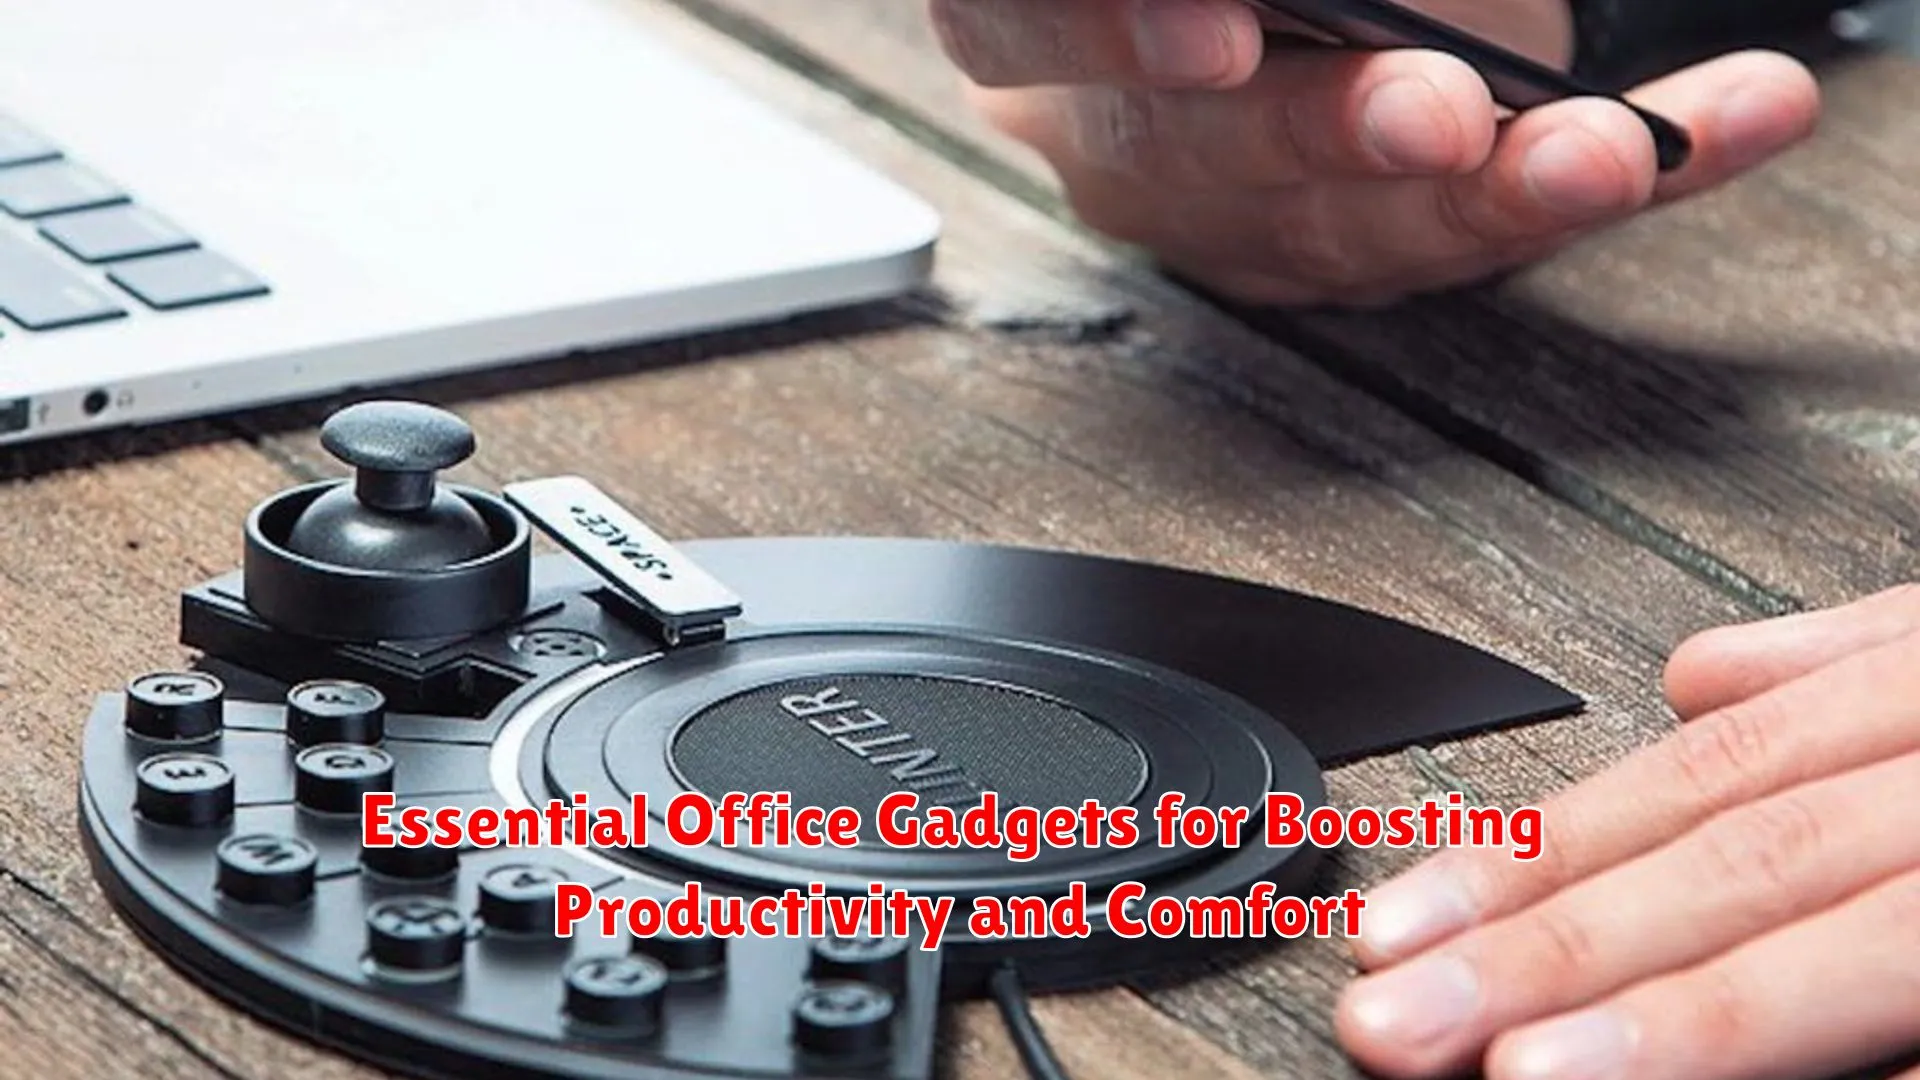 Essential Office Gadgets for Boosting Productivity and Comfort